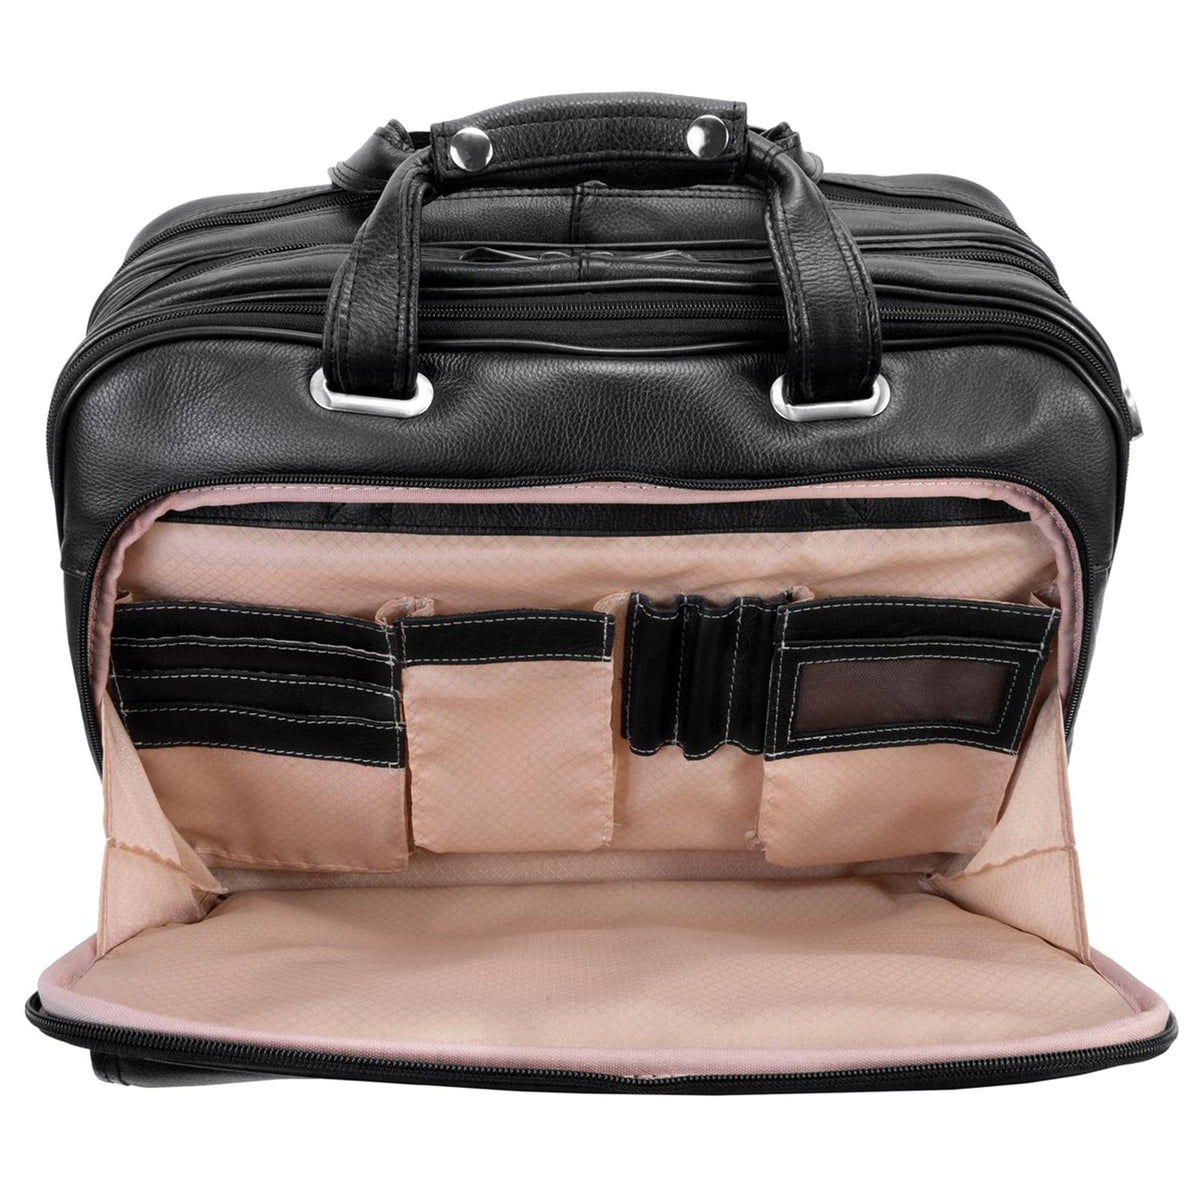 McKlein USA Ceresola 15" Leather Checkpoint-Friendly Patented Detachable -Wheeled Laptop Briefcase